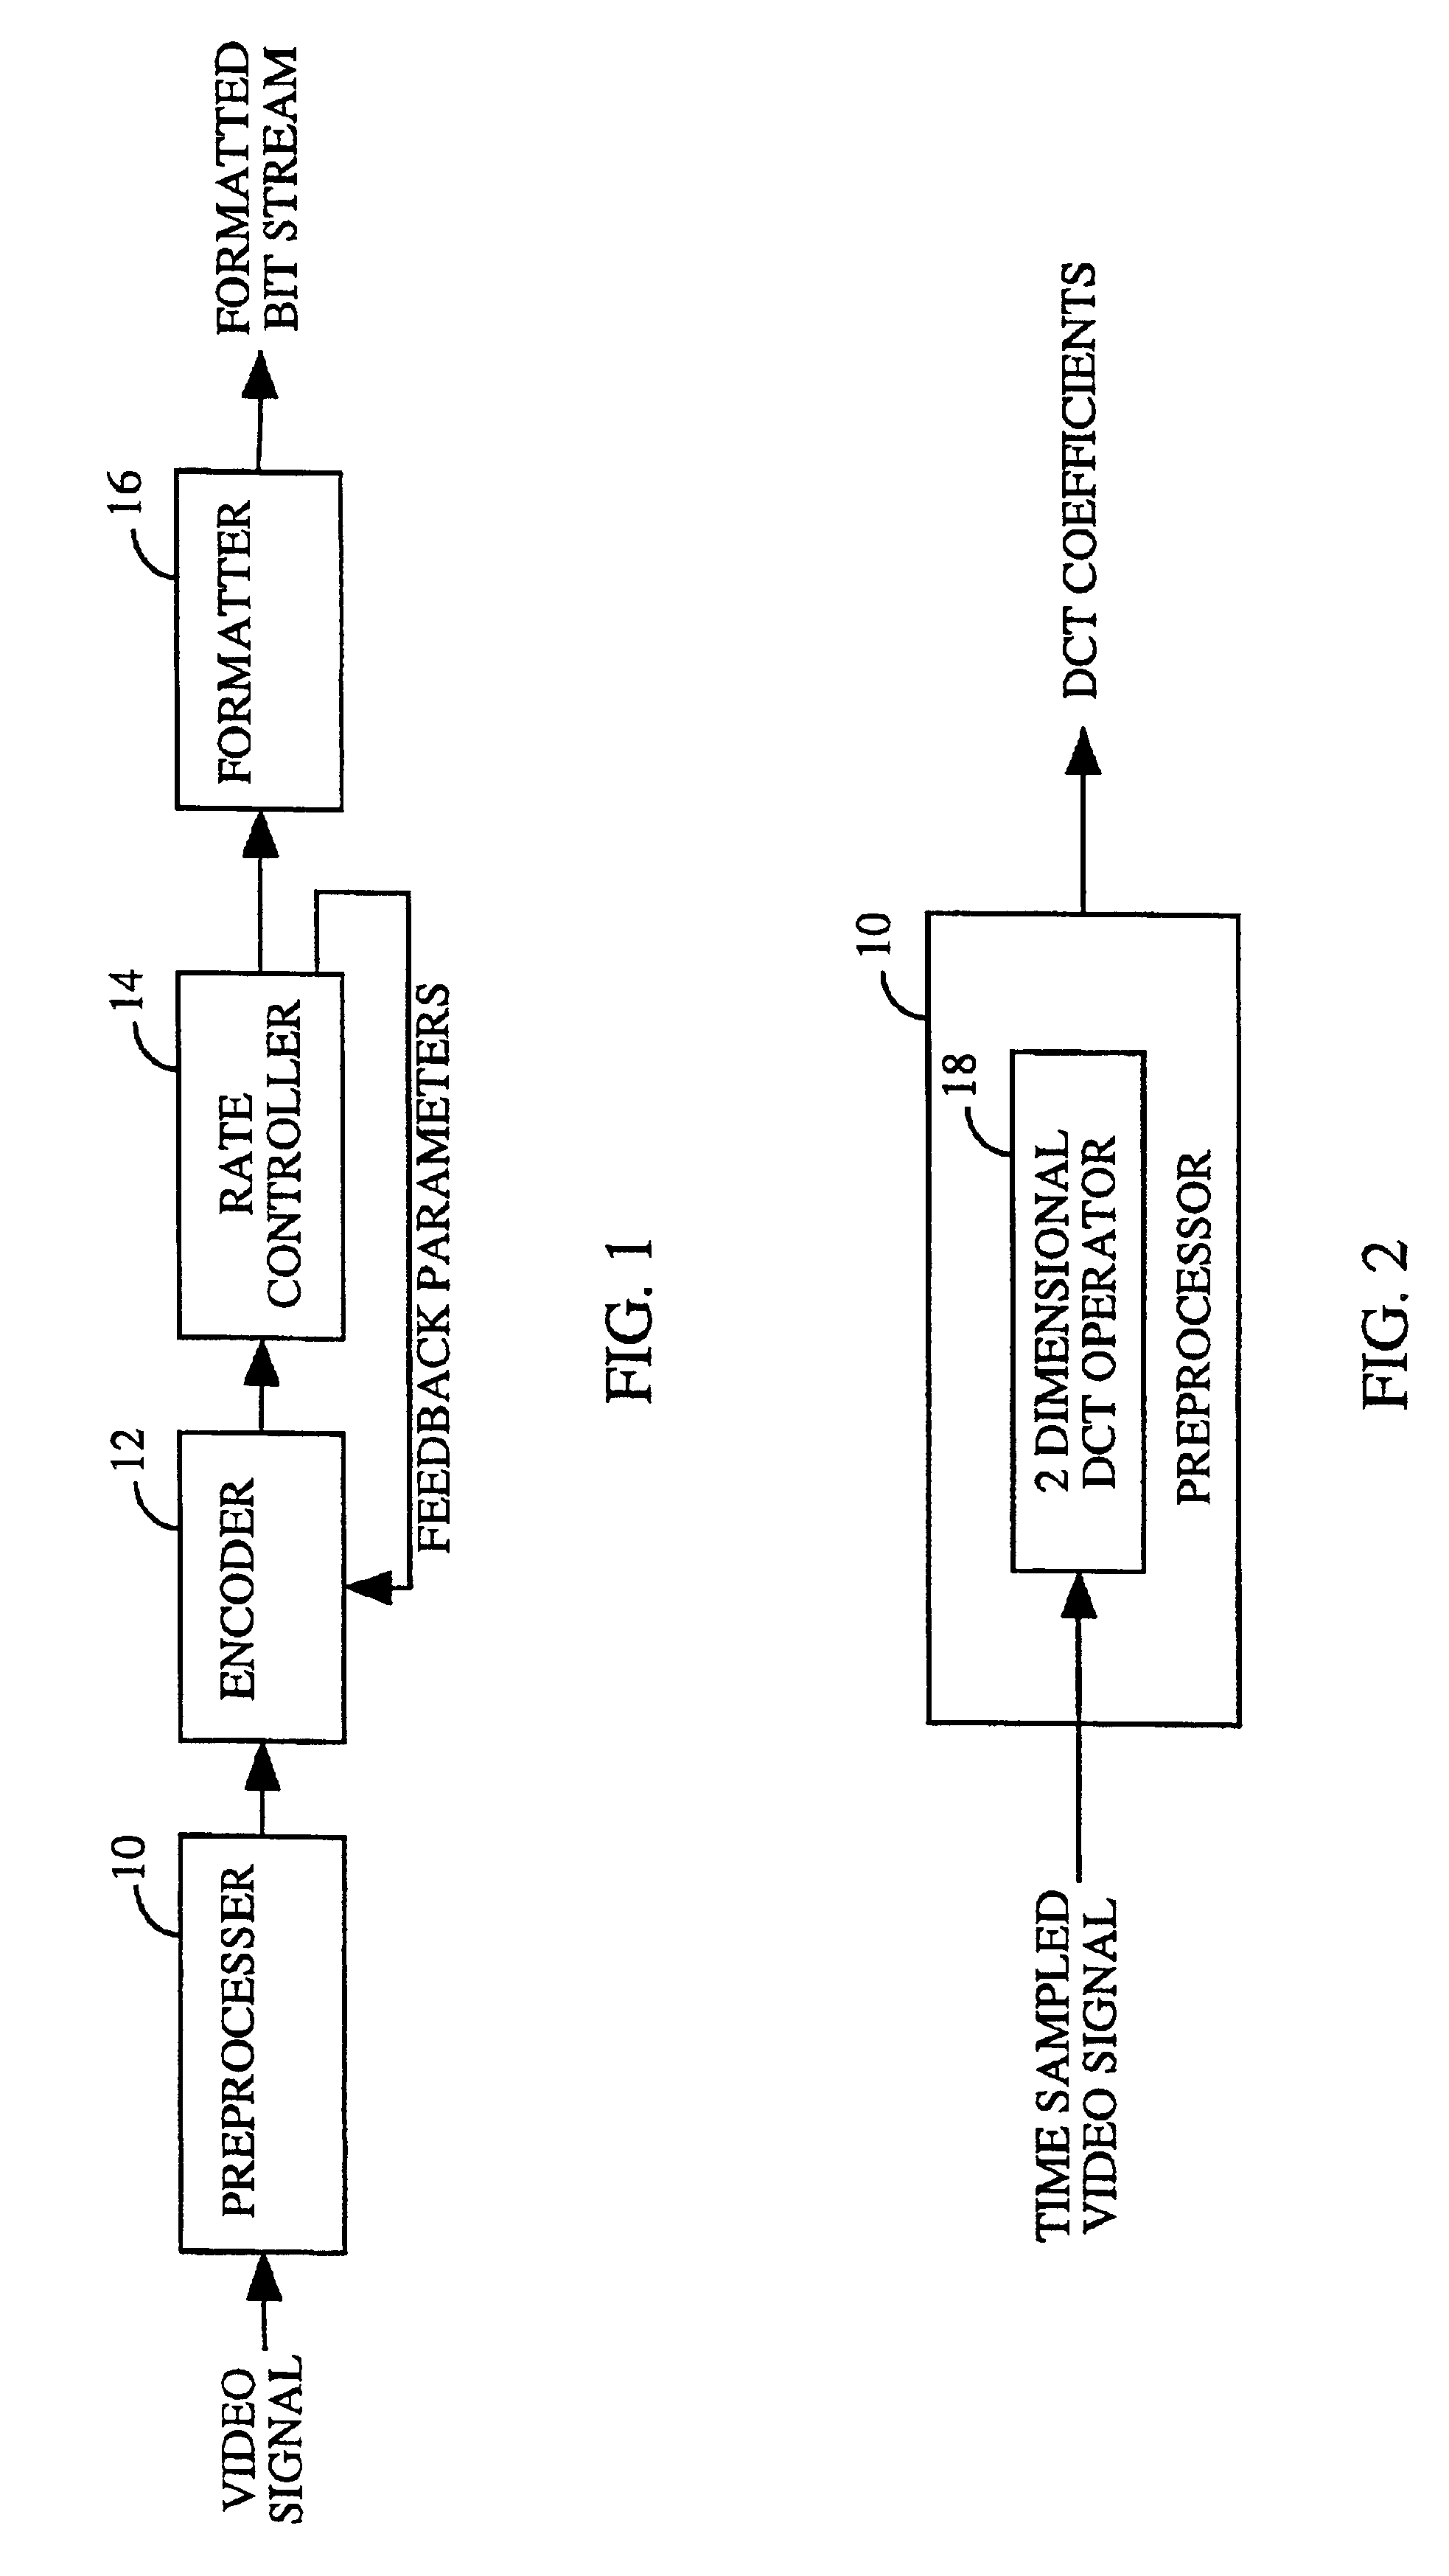 Adaptive rate control for digital video compression